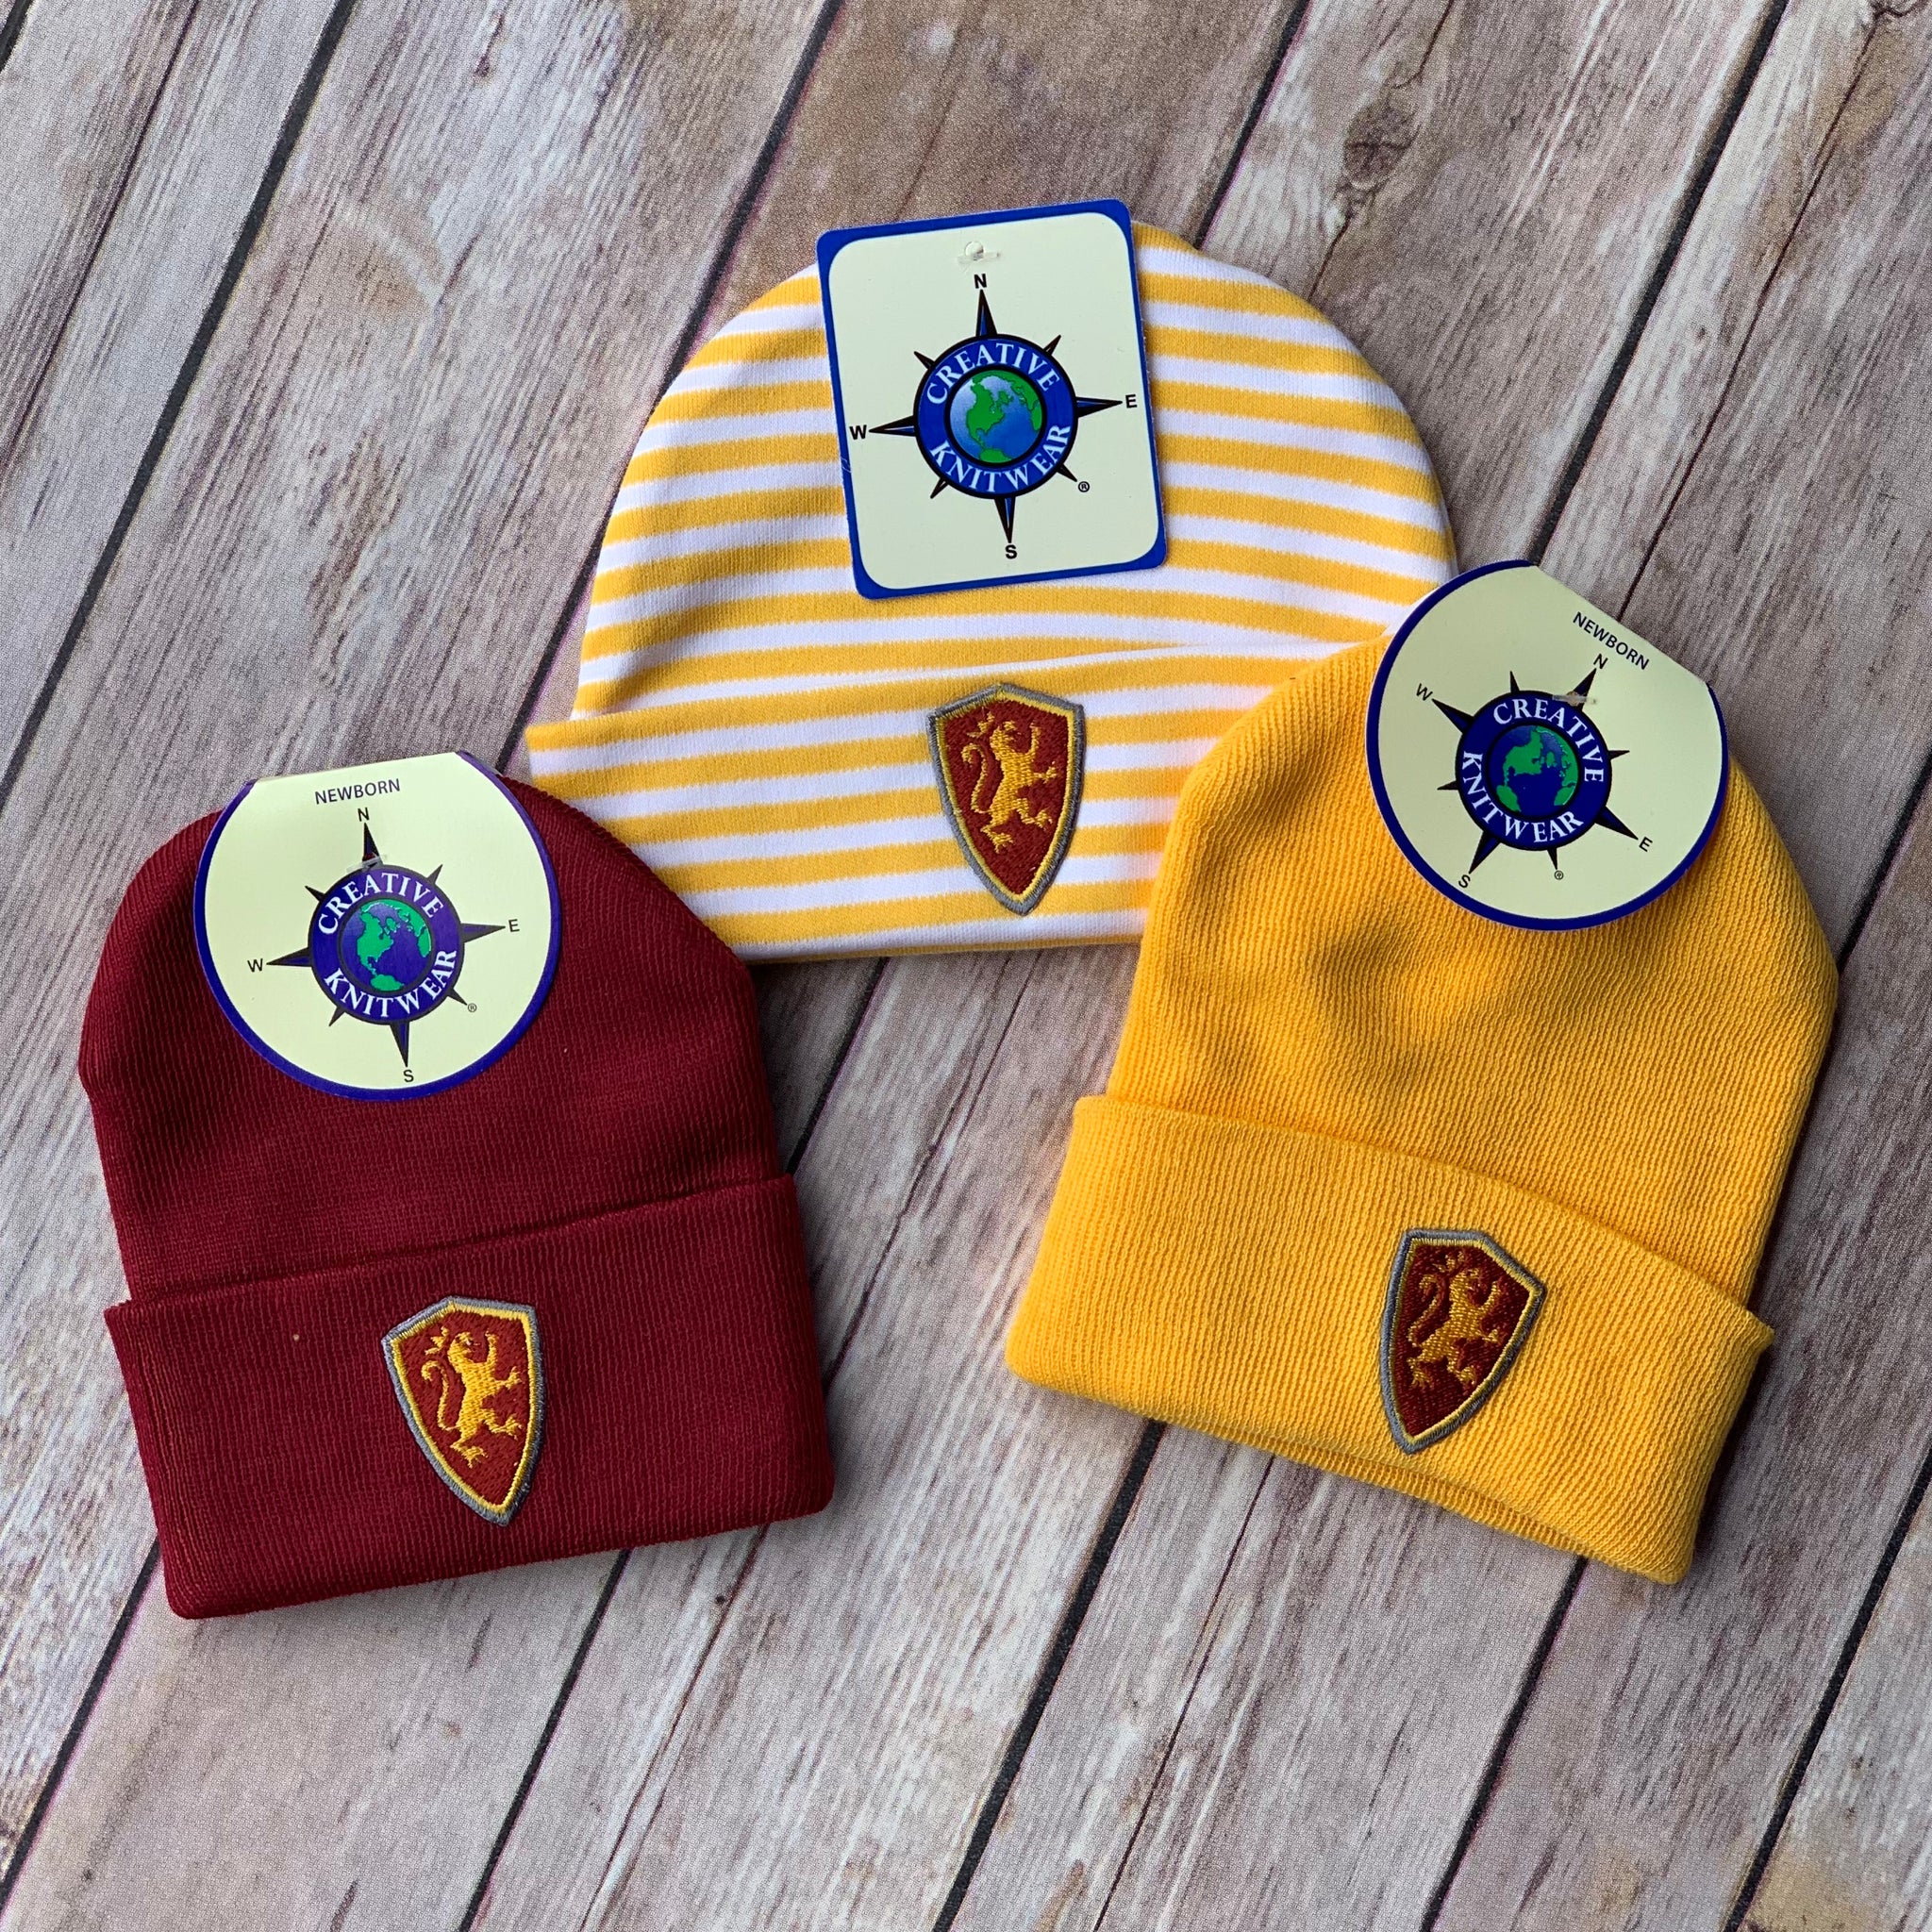 three baby knot caps each with embroidered yellow and red shield patches on the front. the first is solid red, the second has yellow and white stripes and the last is solid yellow